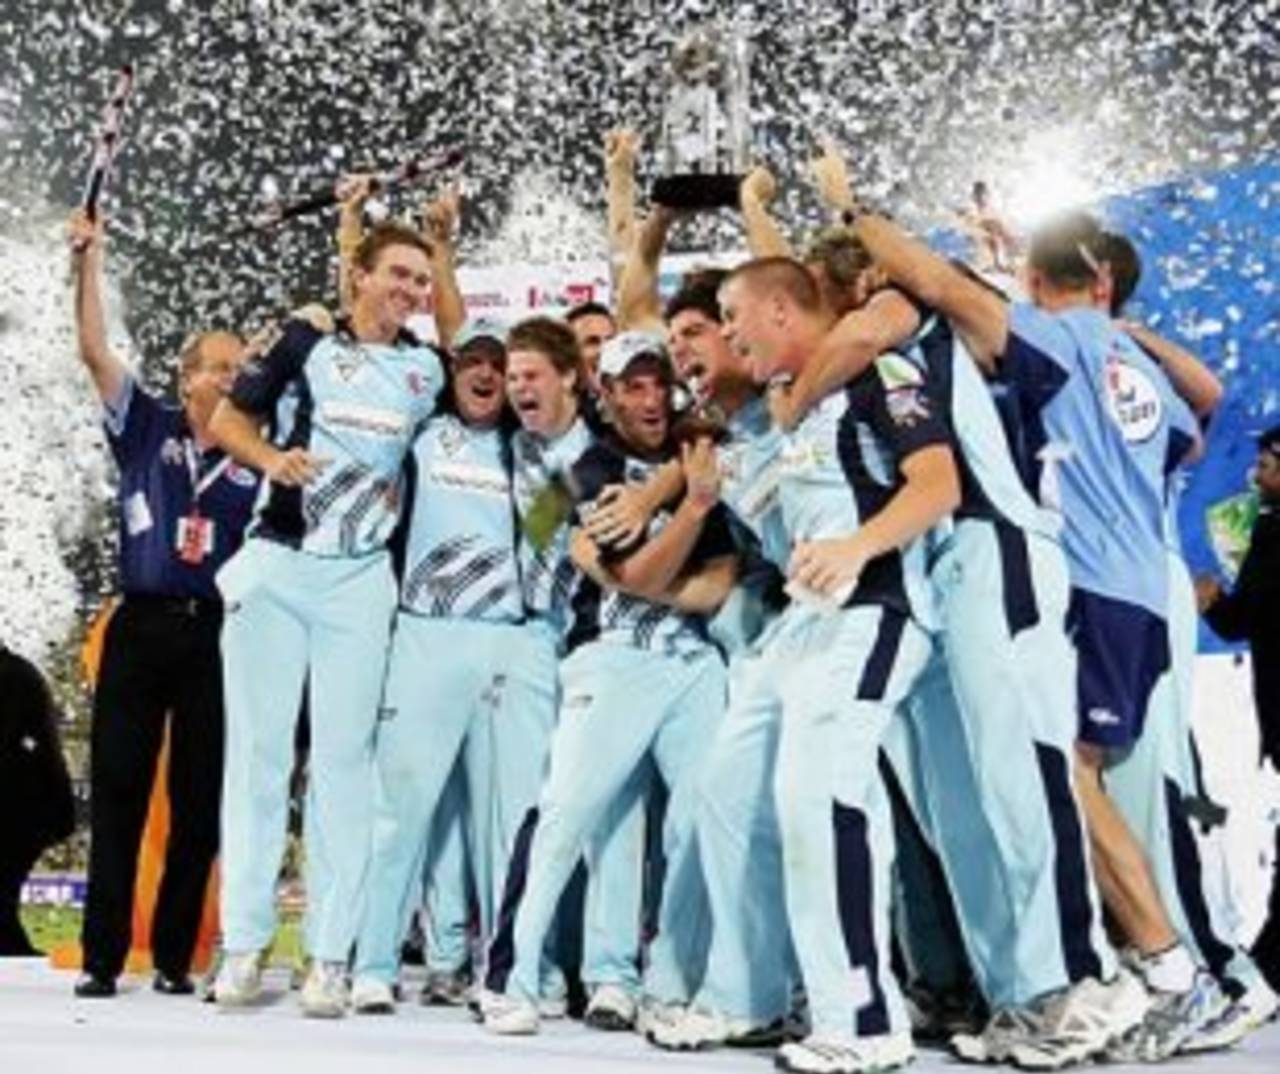 New South Wales, who won the inaugural Champions League, will feature in the tournament this year&nbsp;&nbsp;&bull;&nbsp;&nbsp;Global Cricket Ventures-BCCI